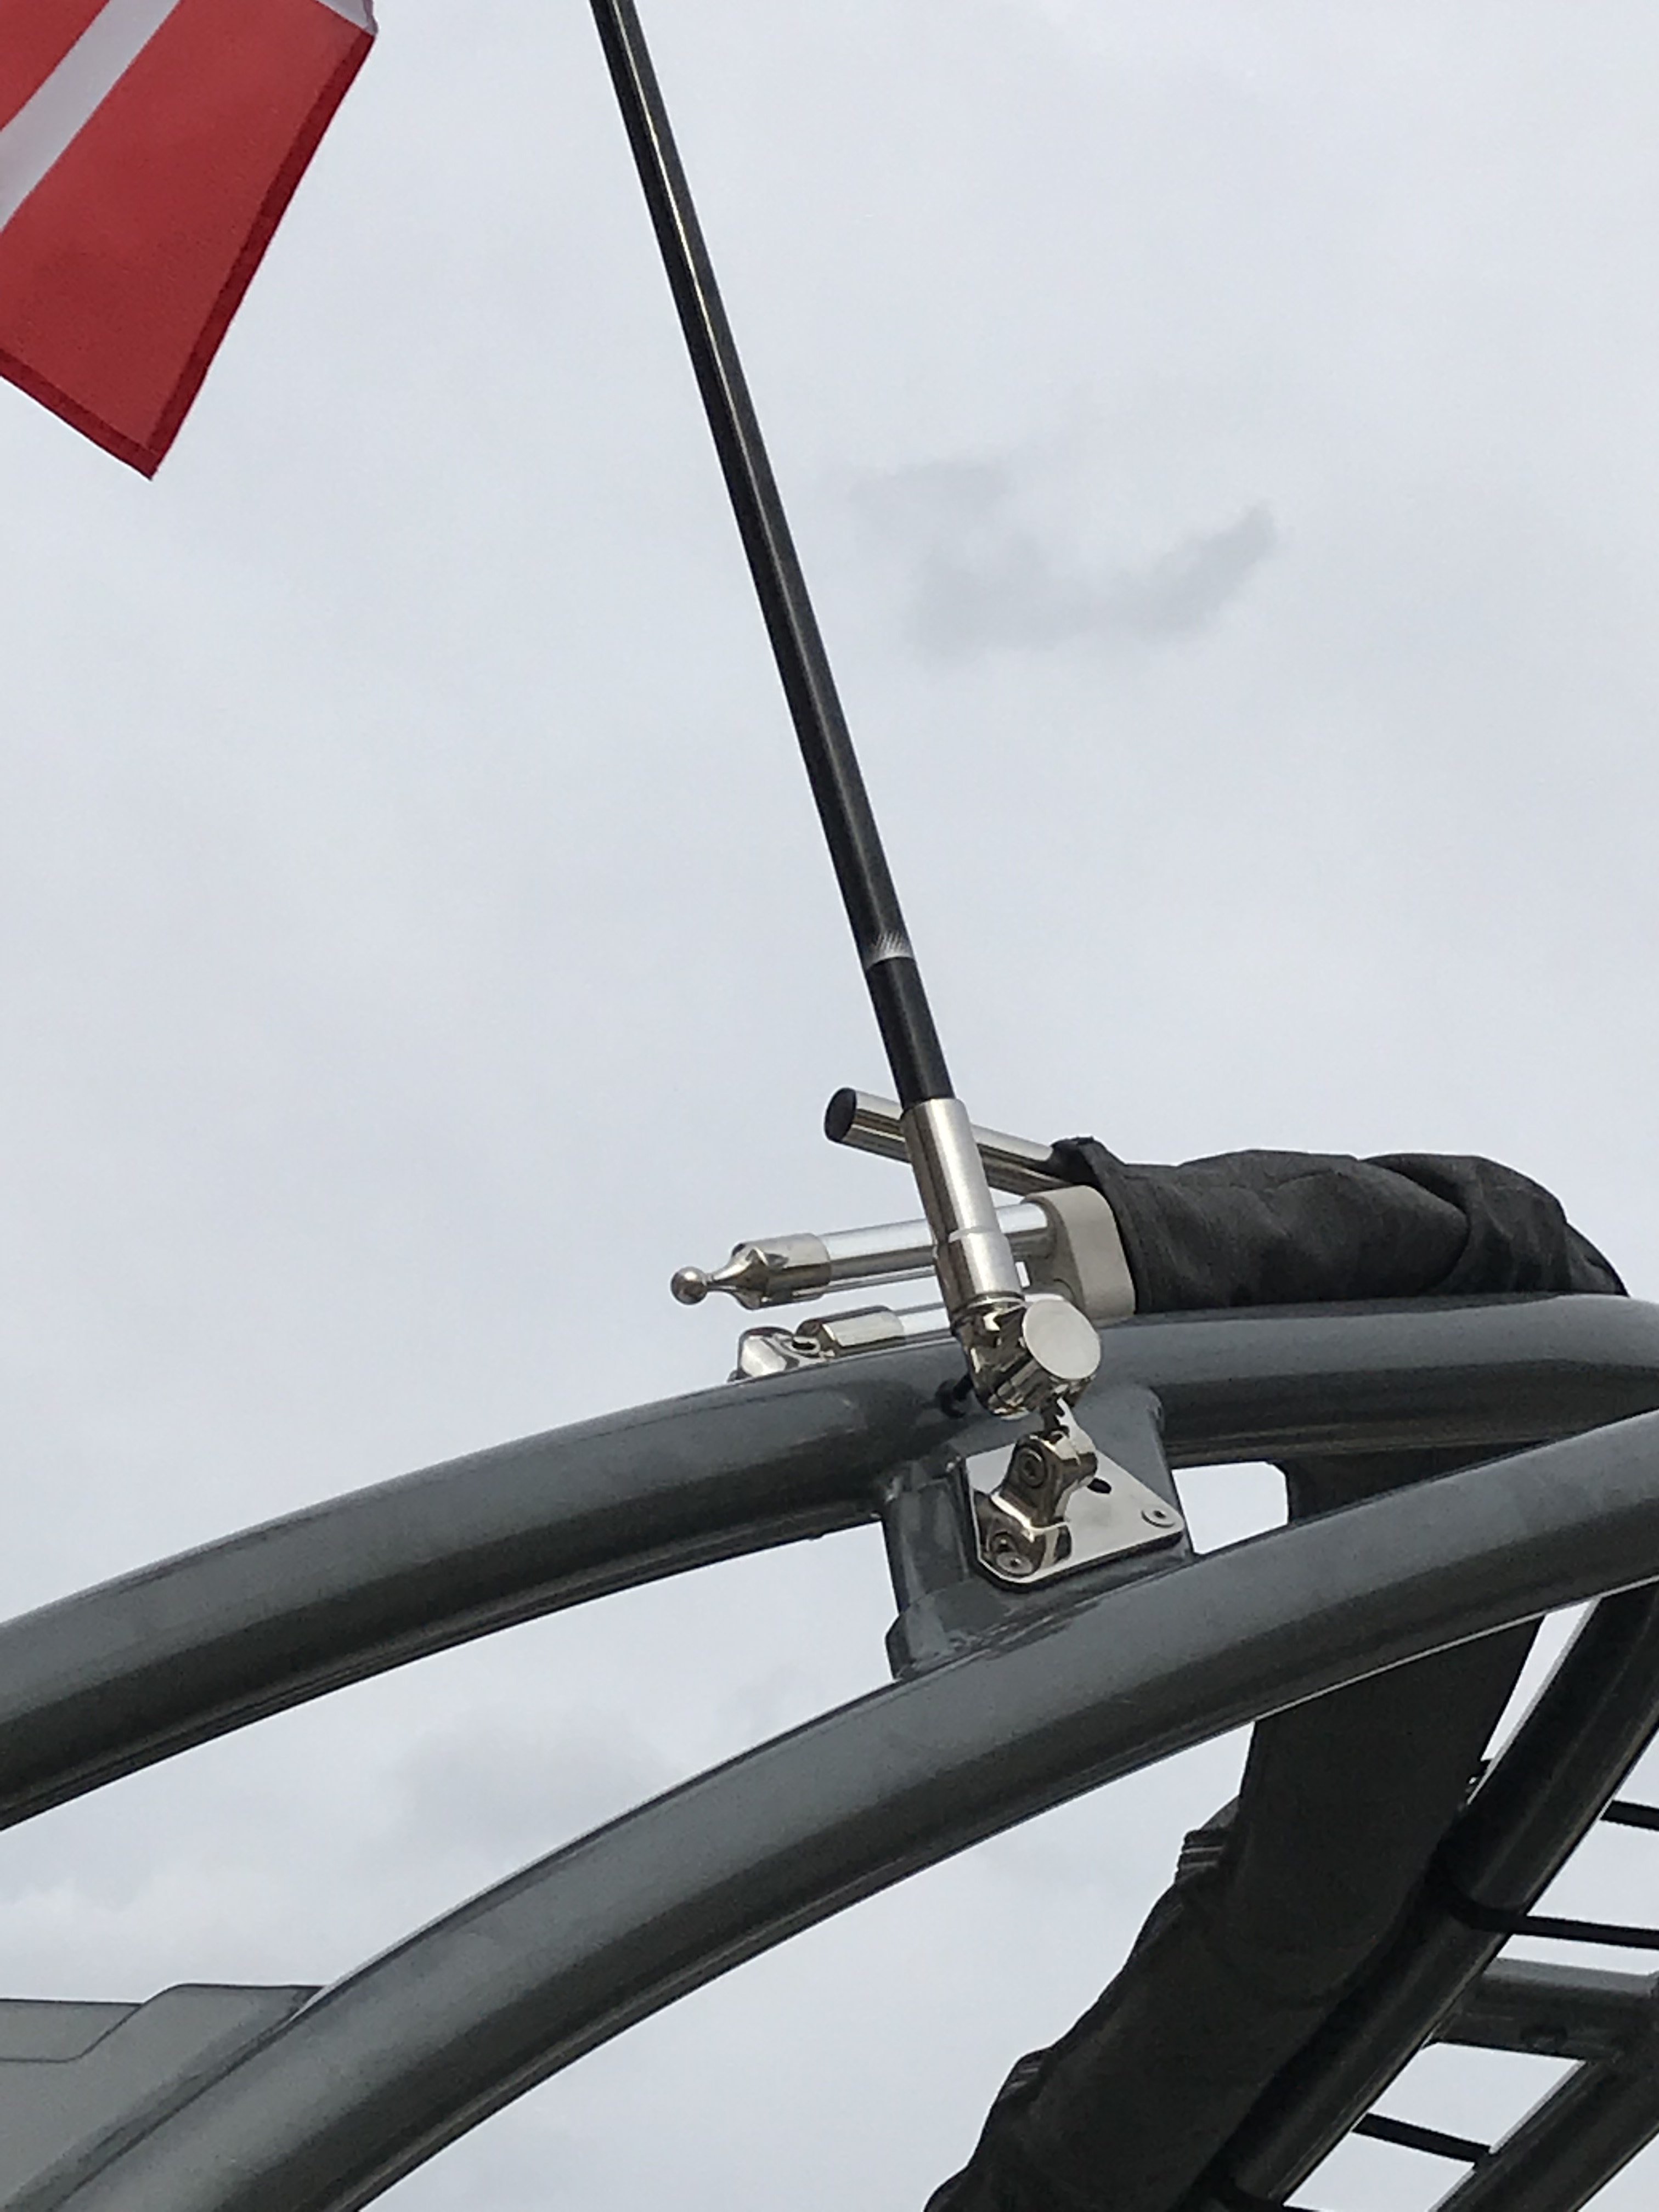 Removable VHF Antenna with mount